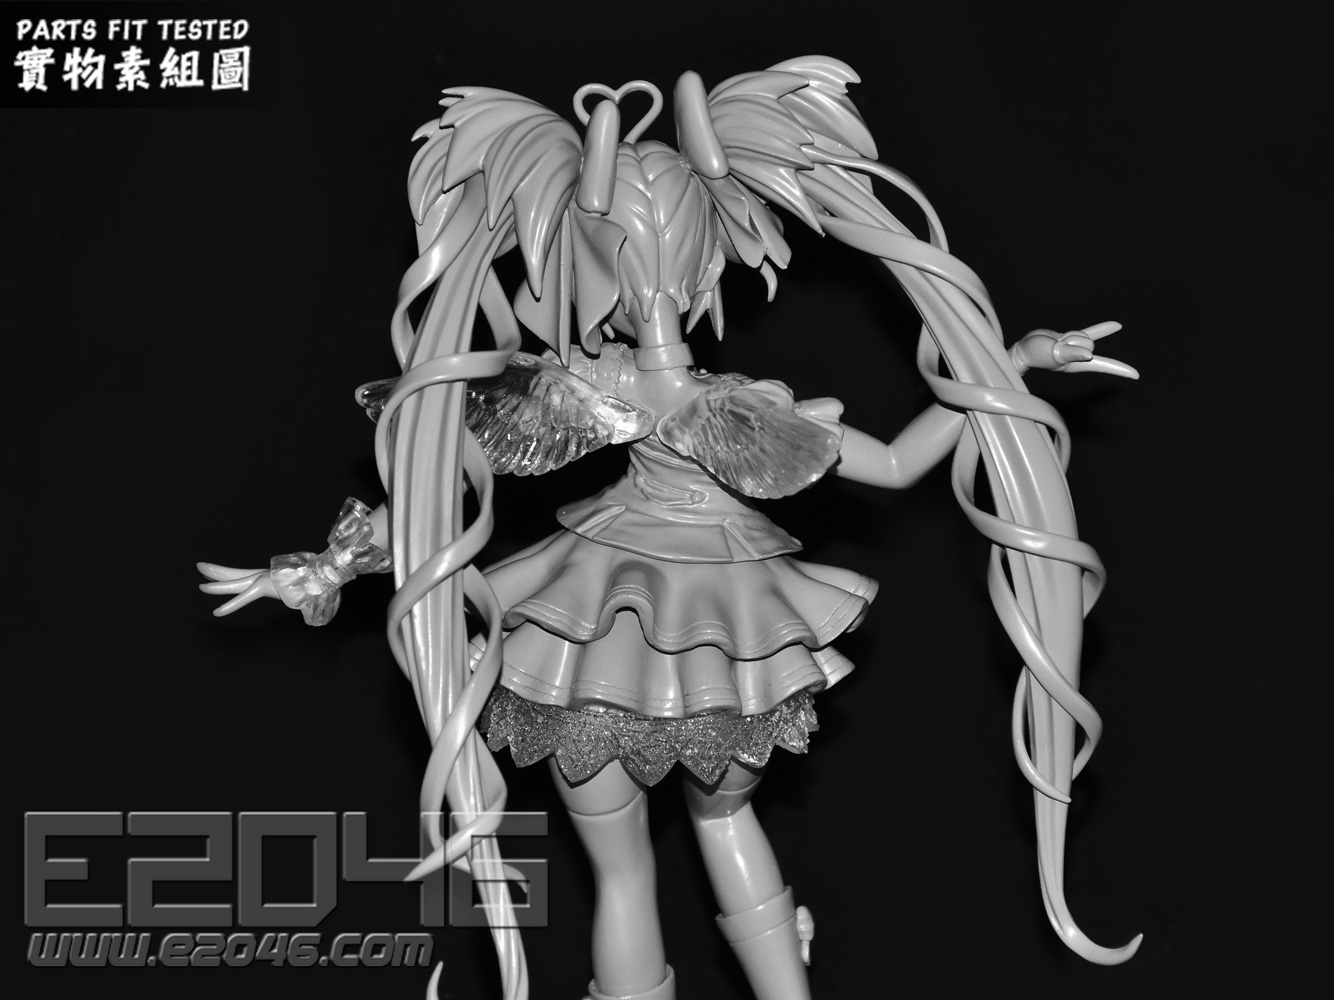 Hatsune Miku out of the gravity Version